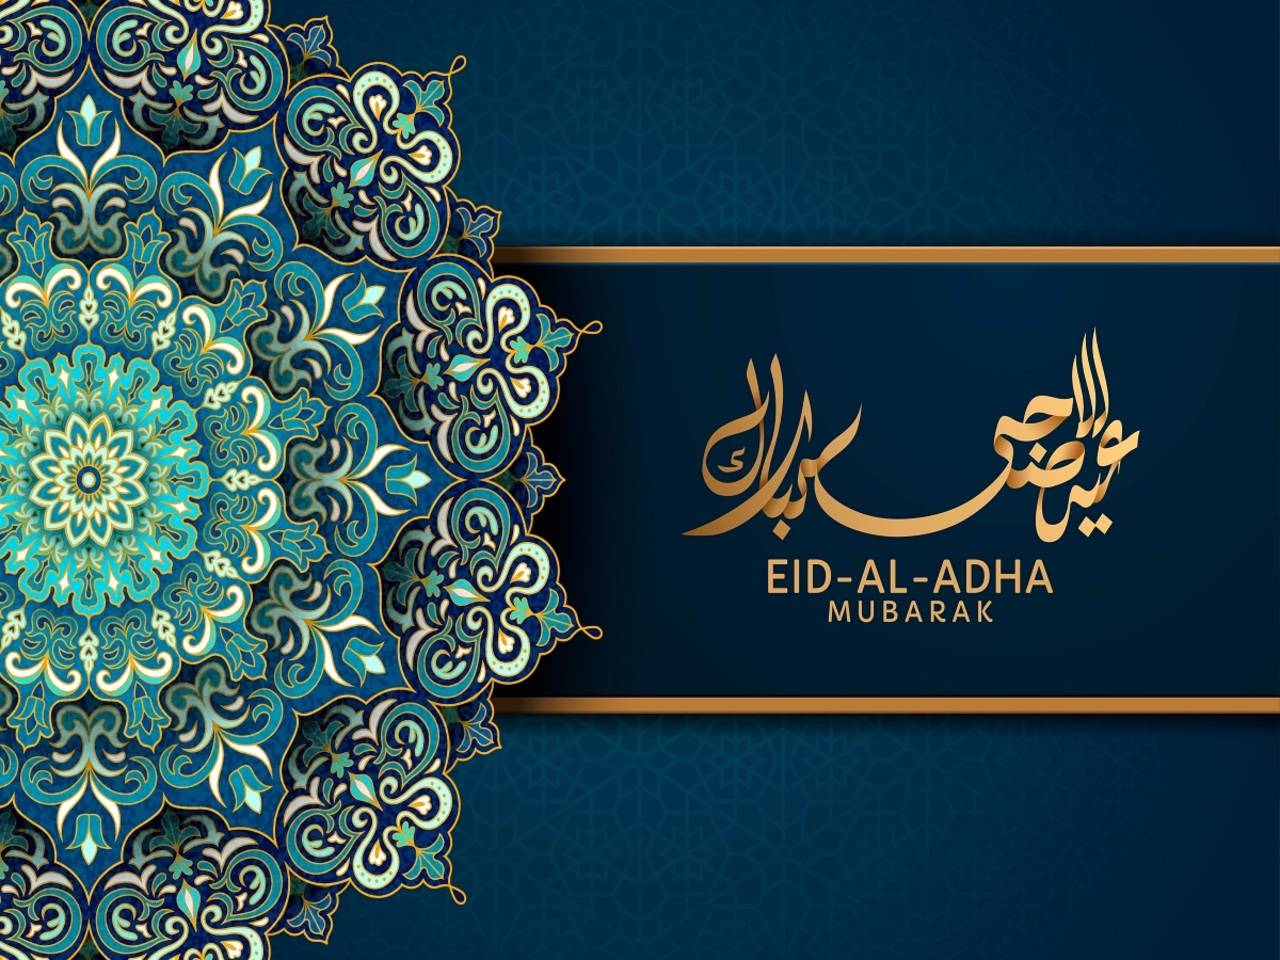 Eid Mubarak Quotes: 15 unique wishes, messages and quotes to wish ...